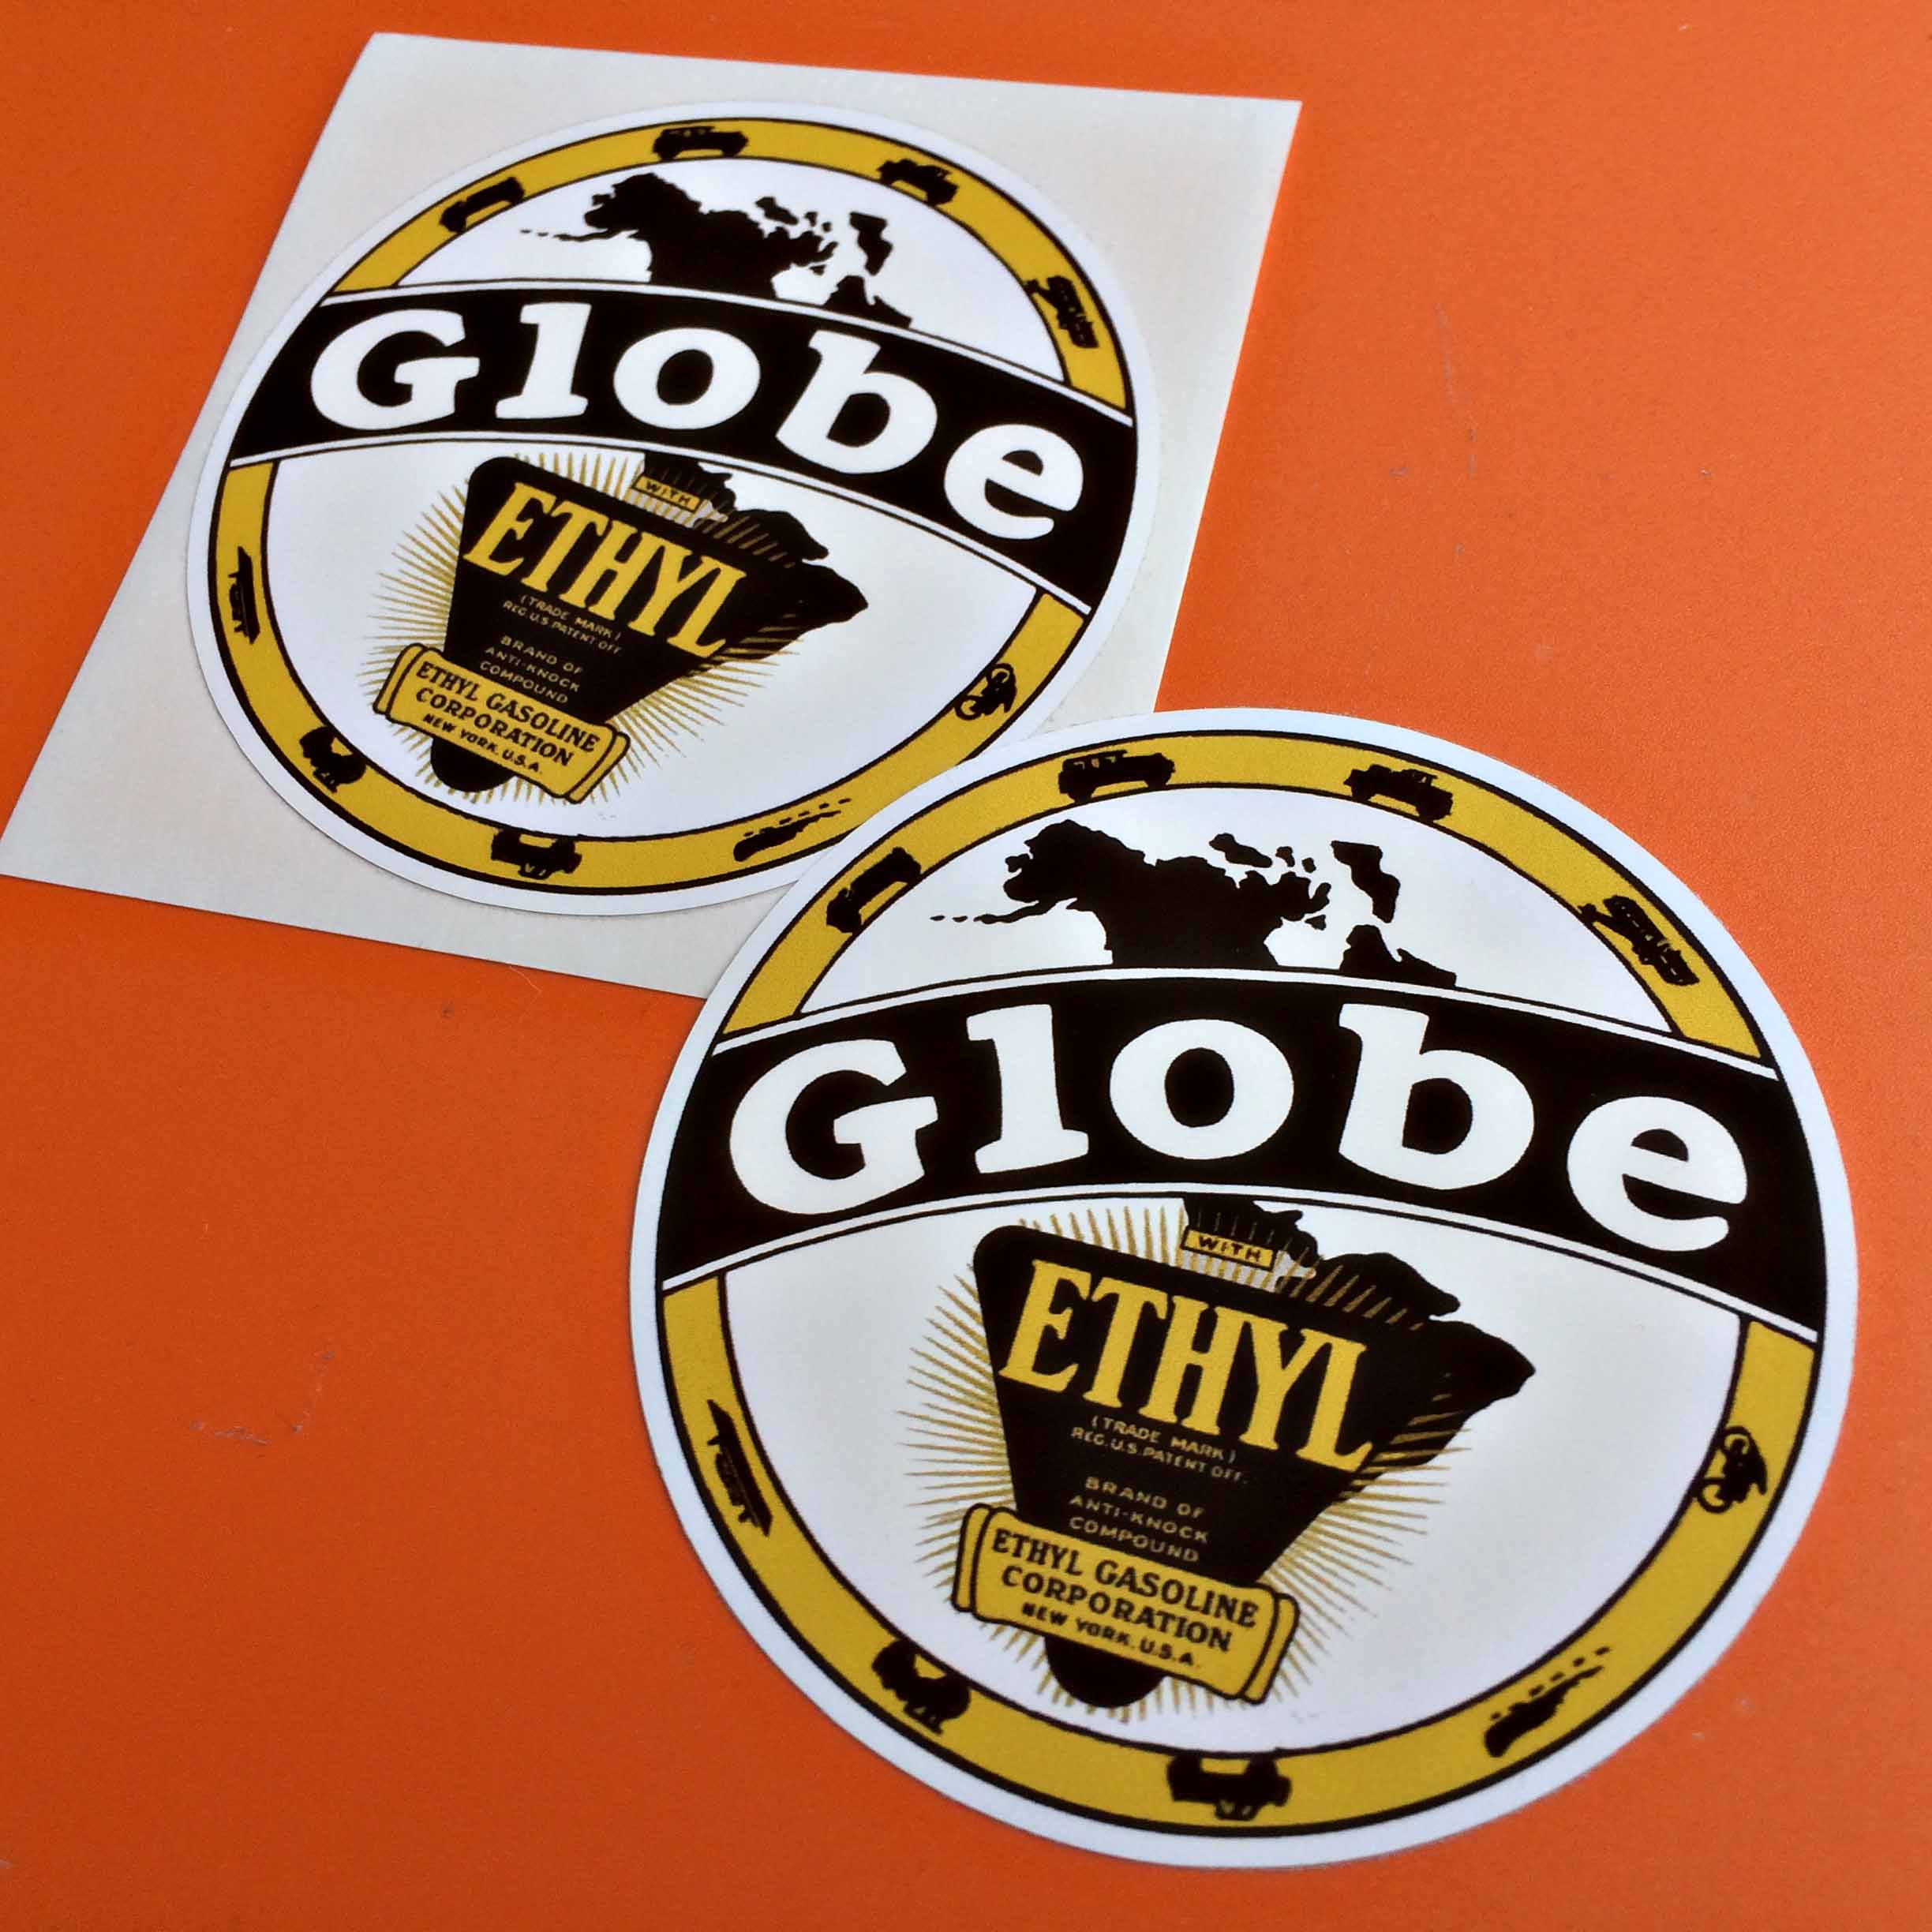 GLOBE ETHYL GASOLINE STICKERS. Globe in white lettering on a black banner sits across tow concentric circles in yellow and white. In the centre is a map of the world and the Ethyl logo, a black inverted triangle with yellow lettering. Types of vehicles surround the outer circle.